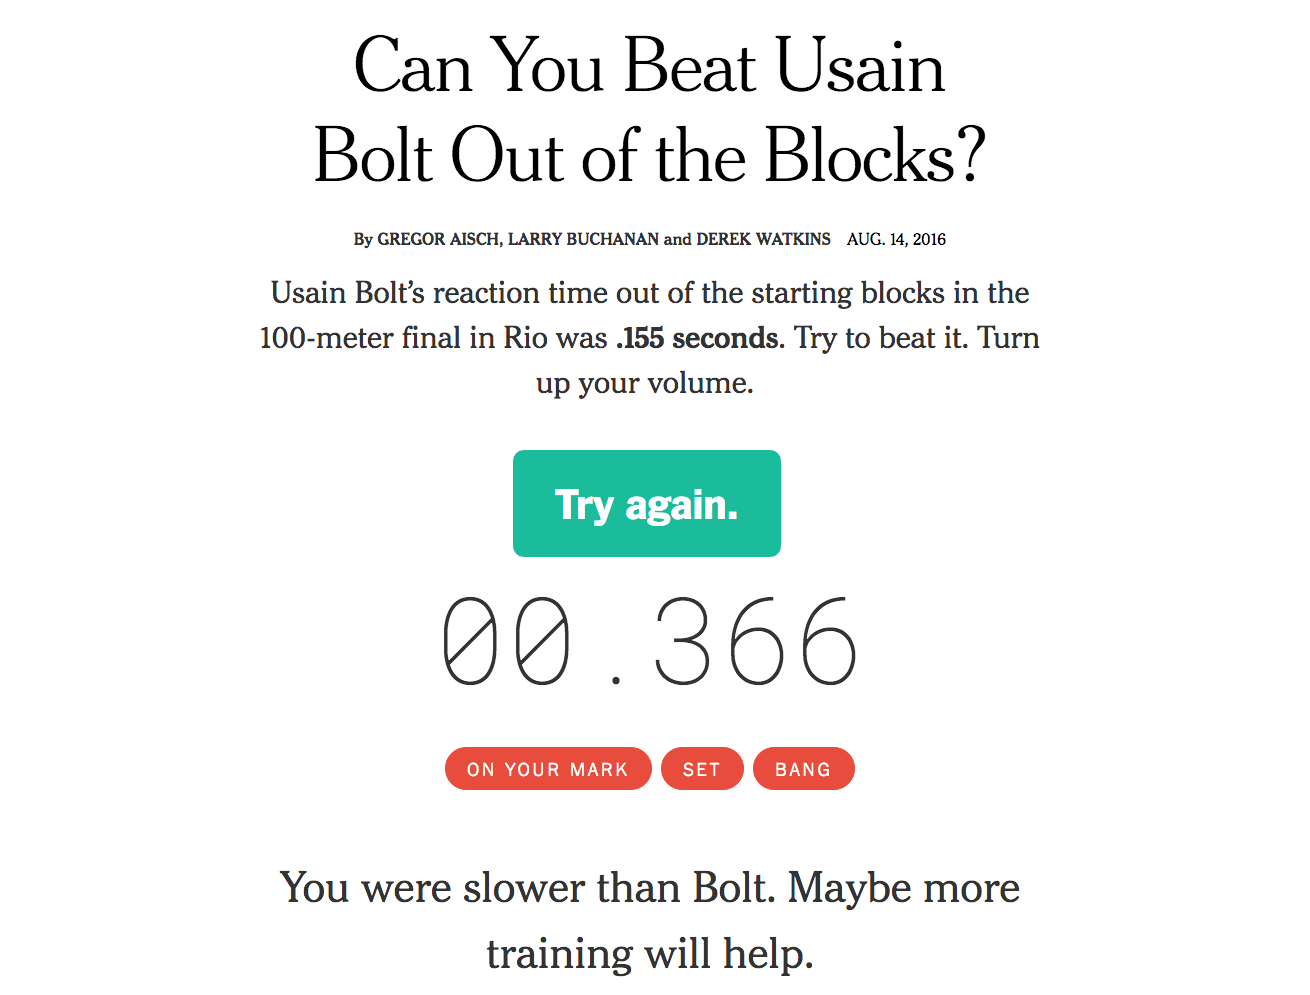 Can You Beat Usain Bolt Out of the Blocks?